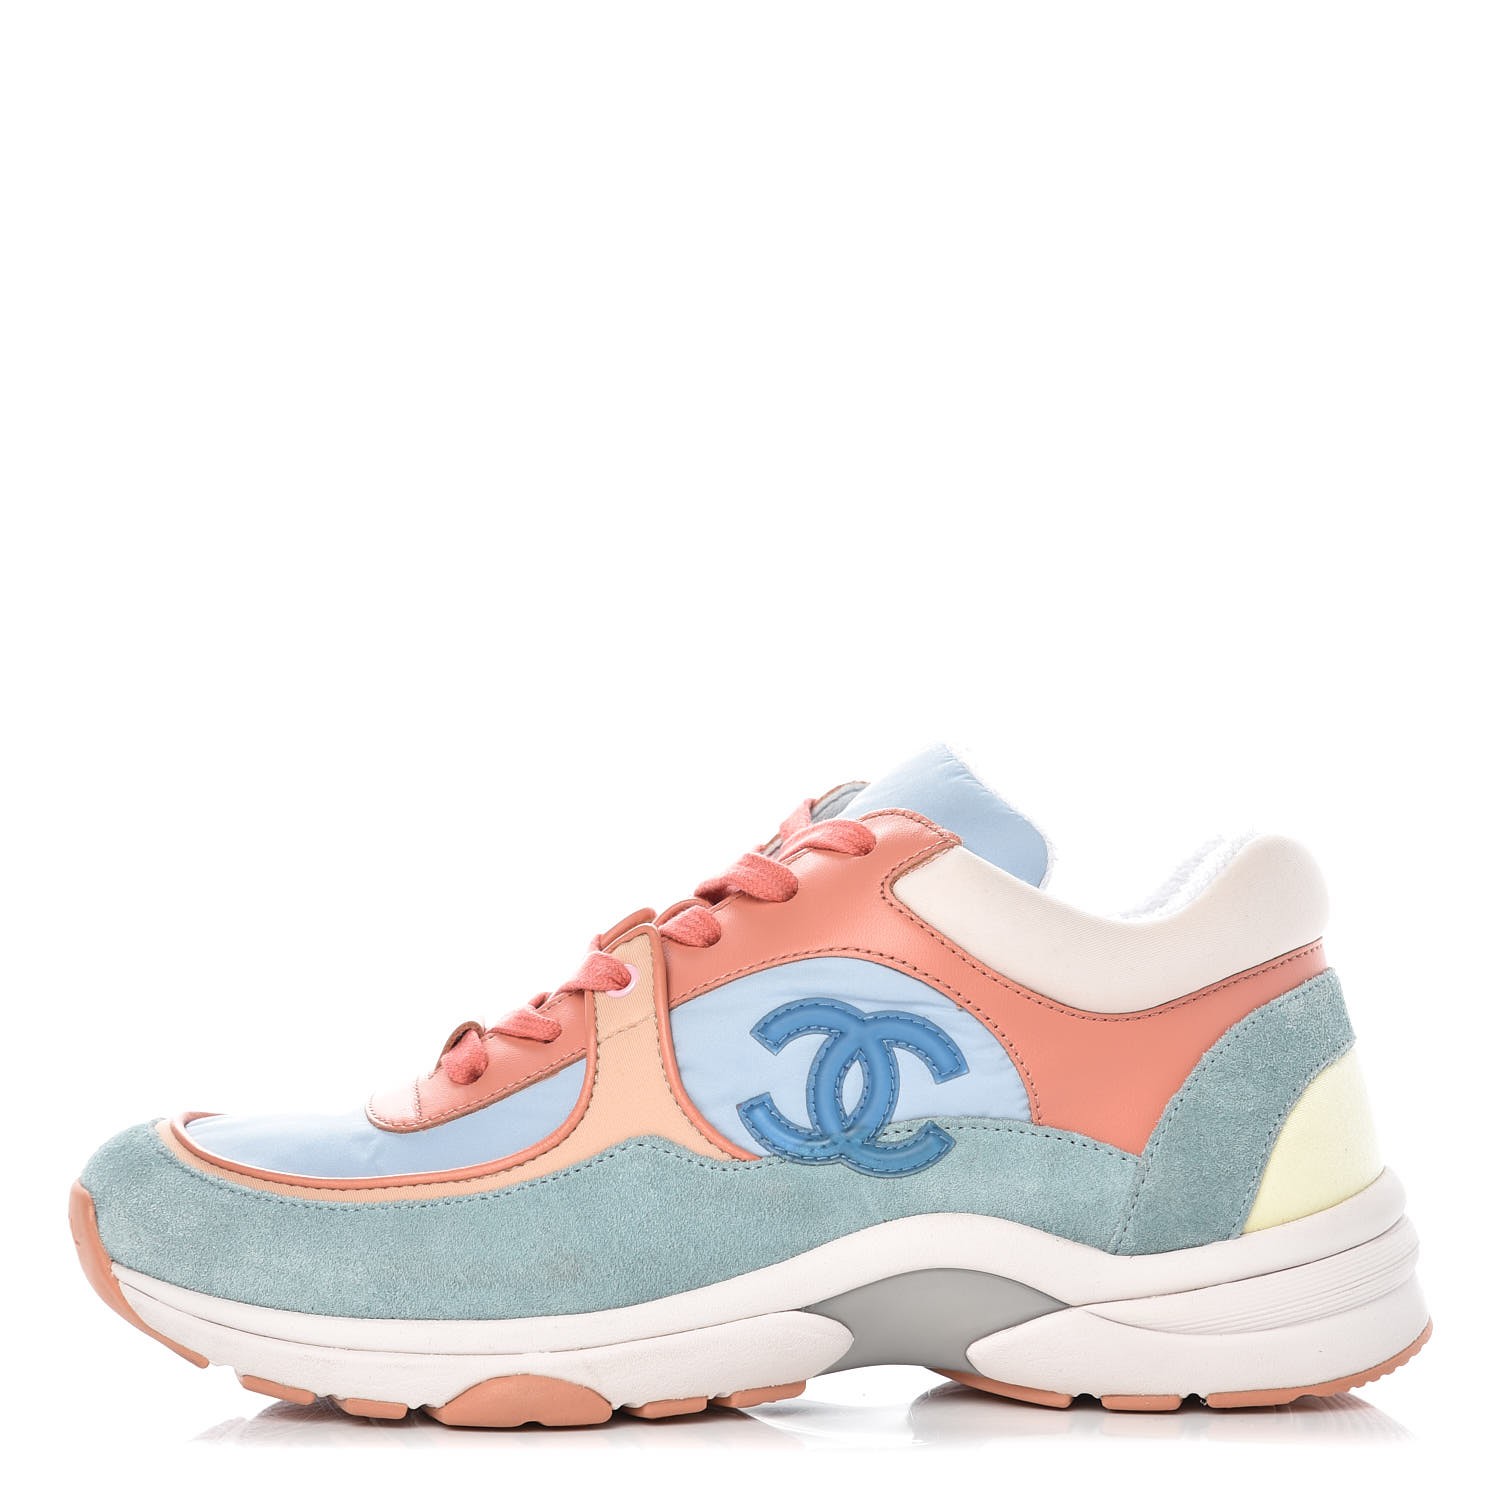 chanel sneakers white and orange